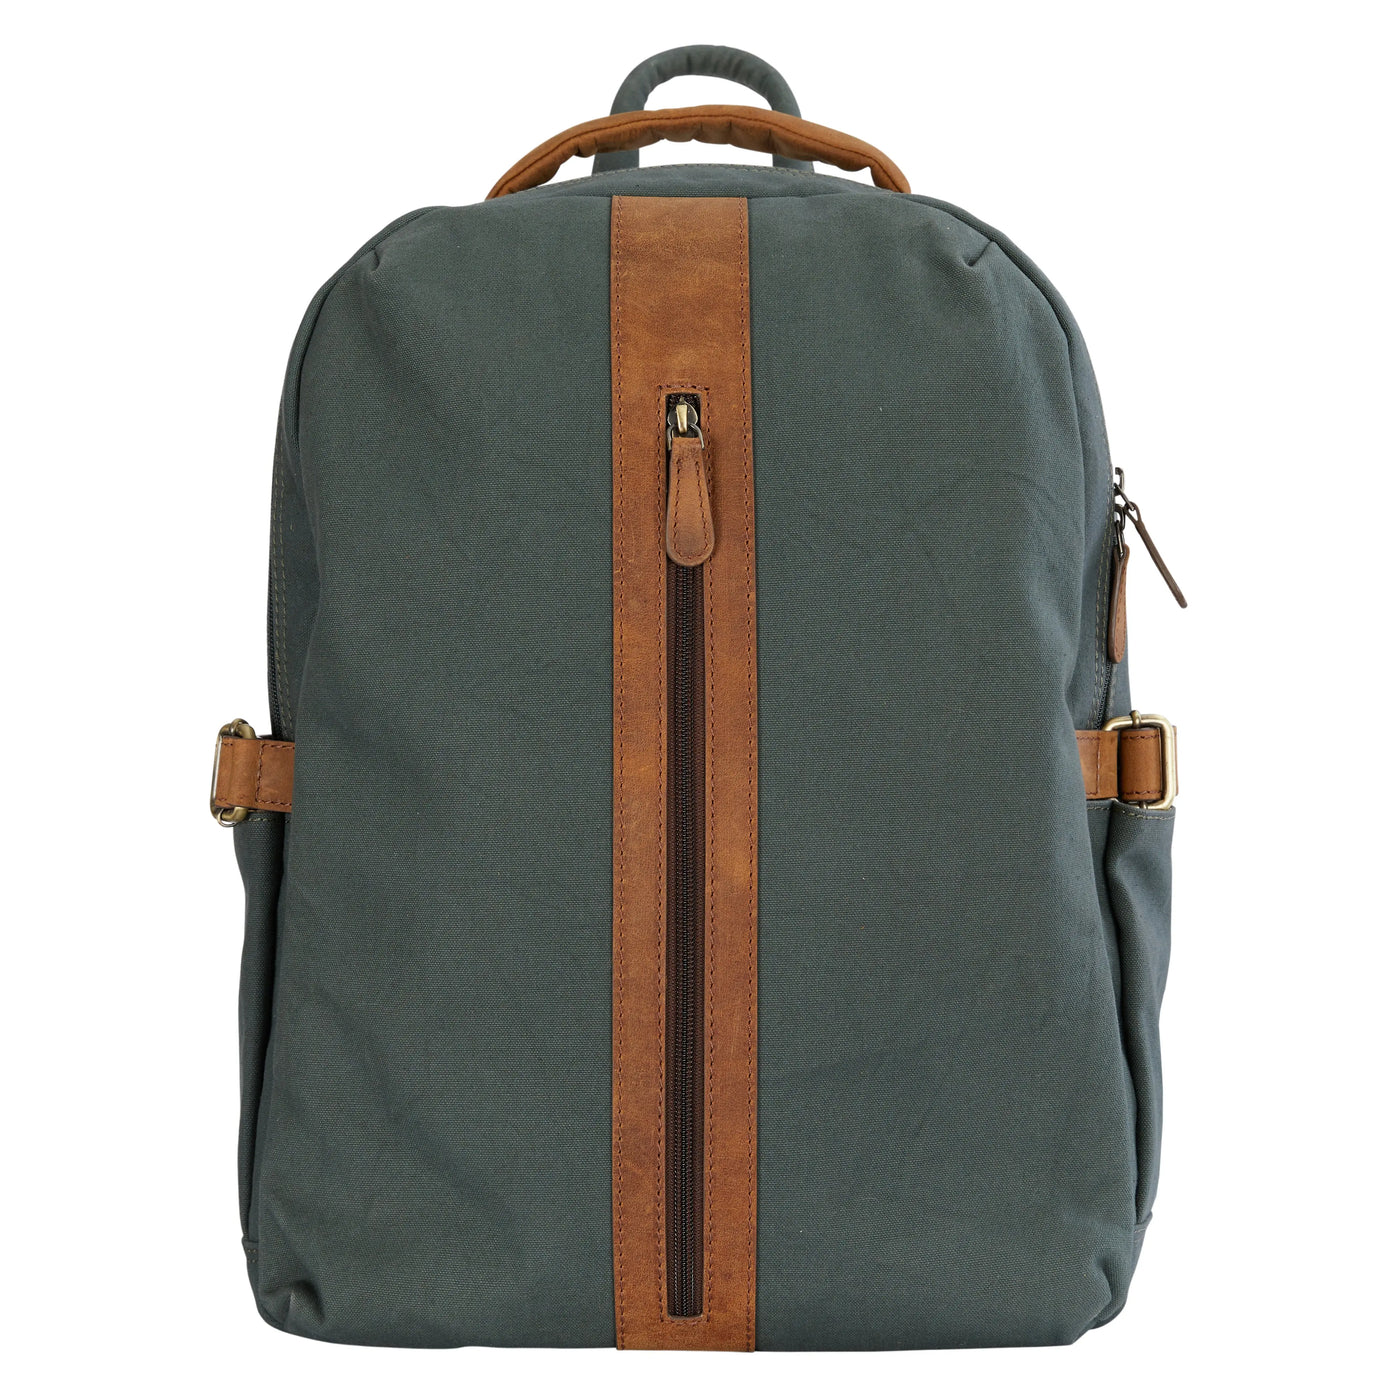 Bayshore Hunter Leather and Canvas Rucksack